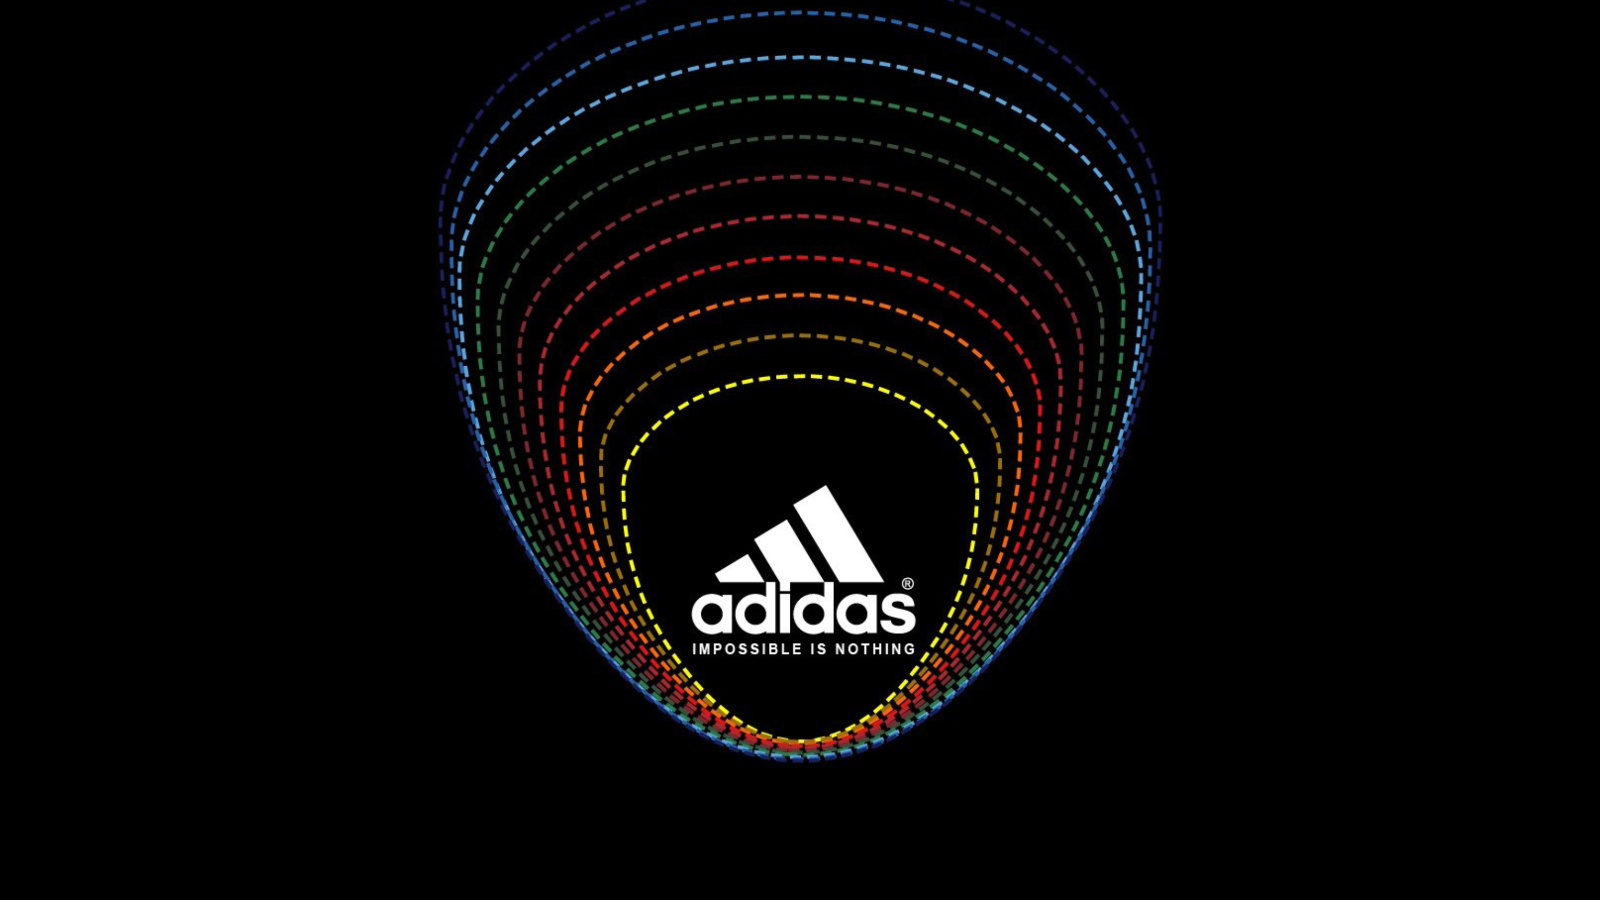 Adidas Tagline, Impossible is Nothing screenshot #1 1600x900